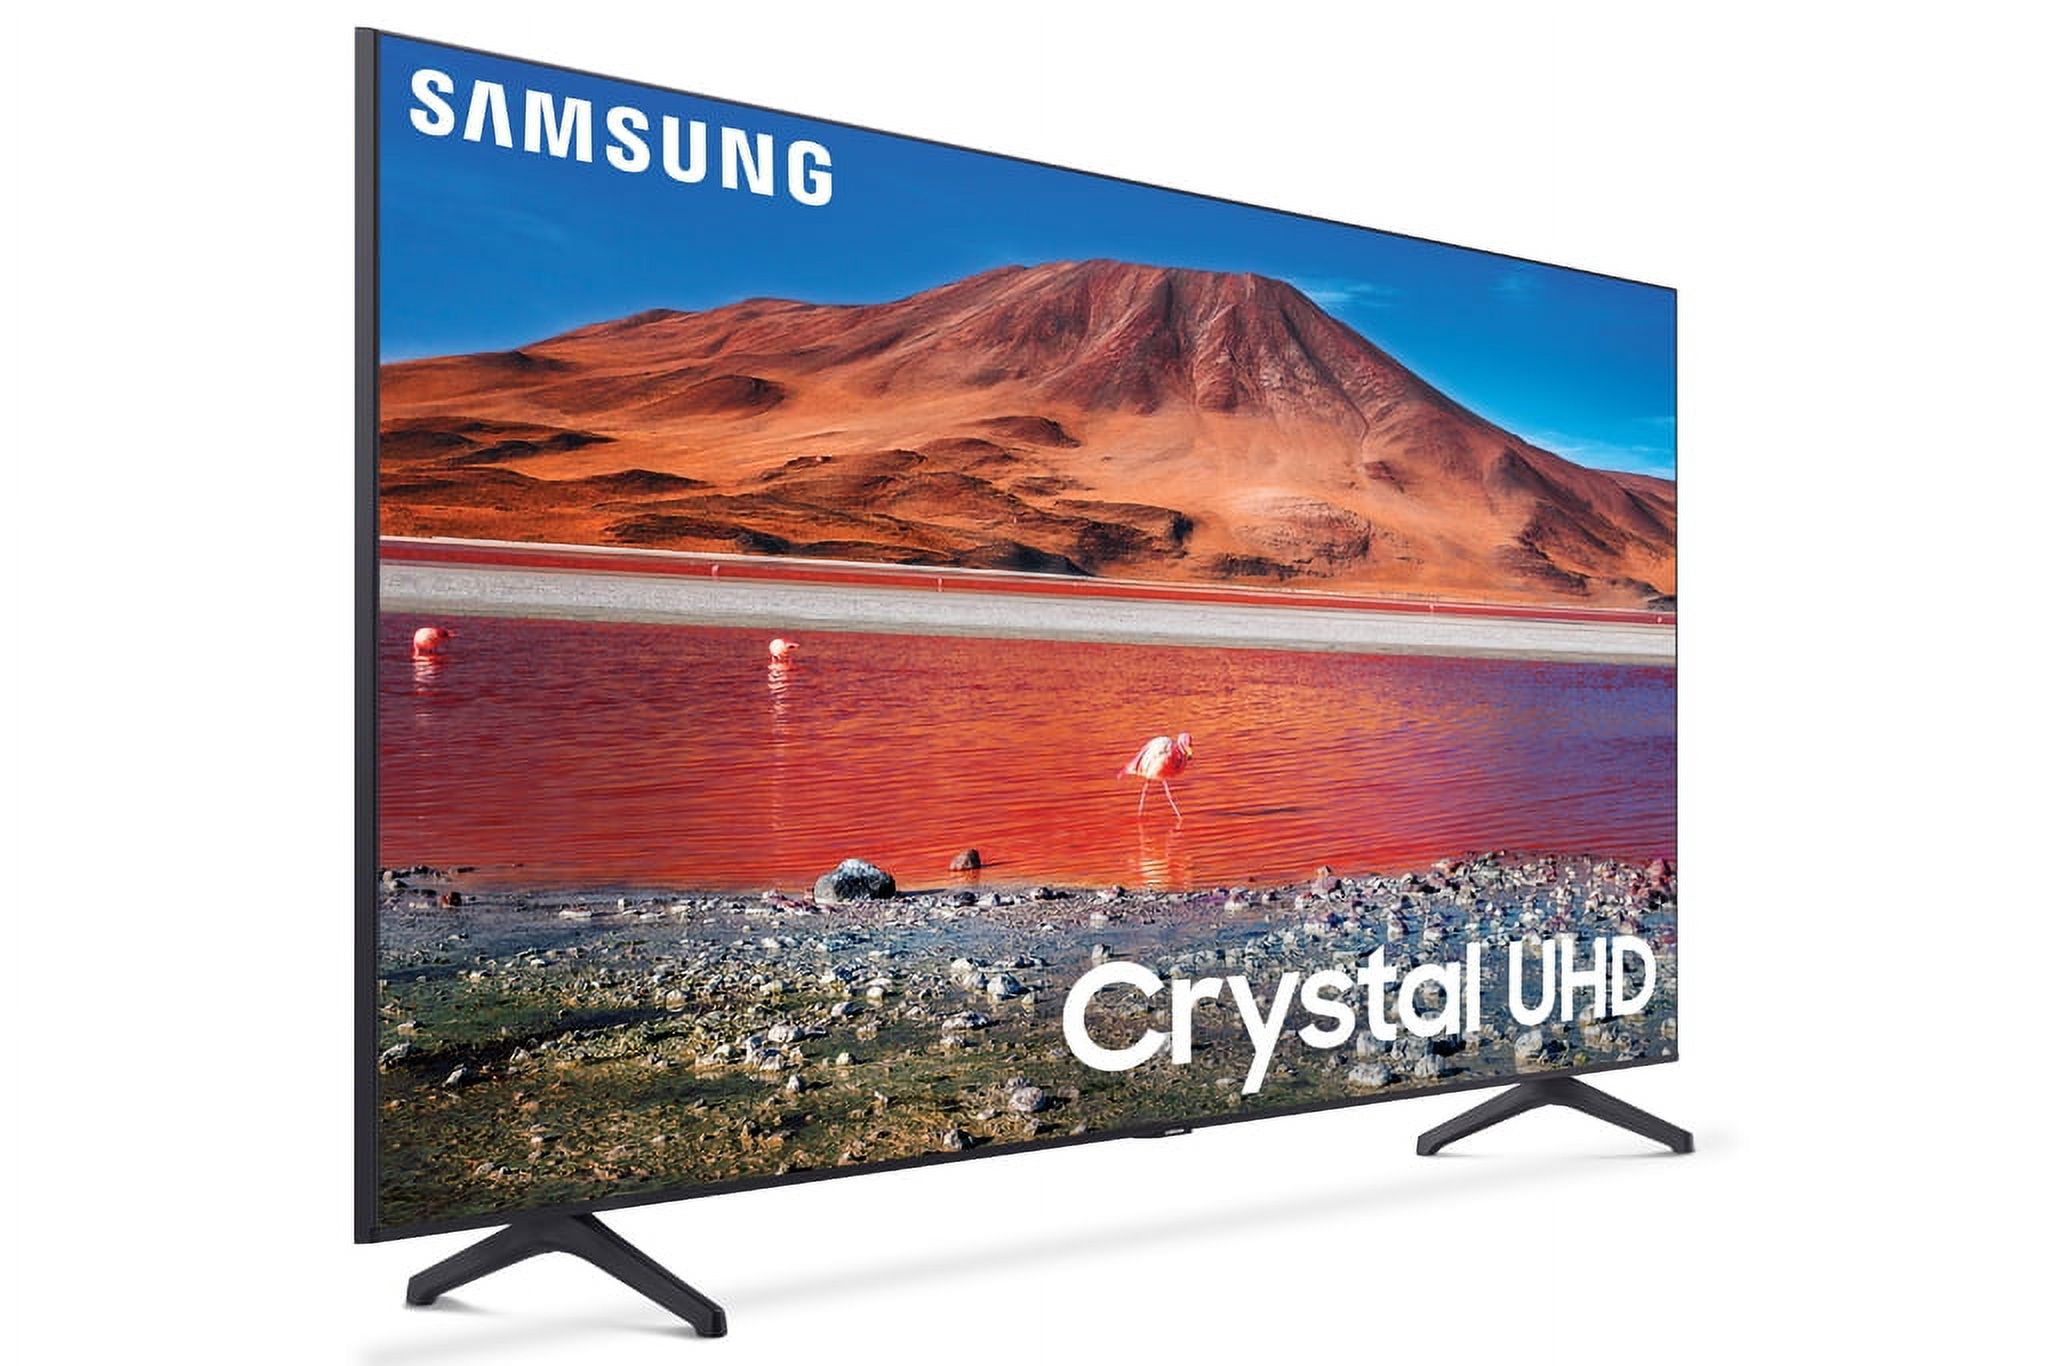 SAMSUNG 70" Class 4K Crystal UHD (2160P) LED Smart TV with HDR UN70TU7000BXZA - image 3 of 16